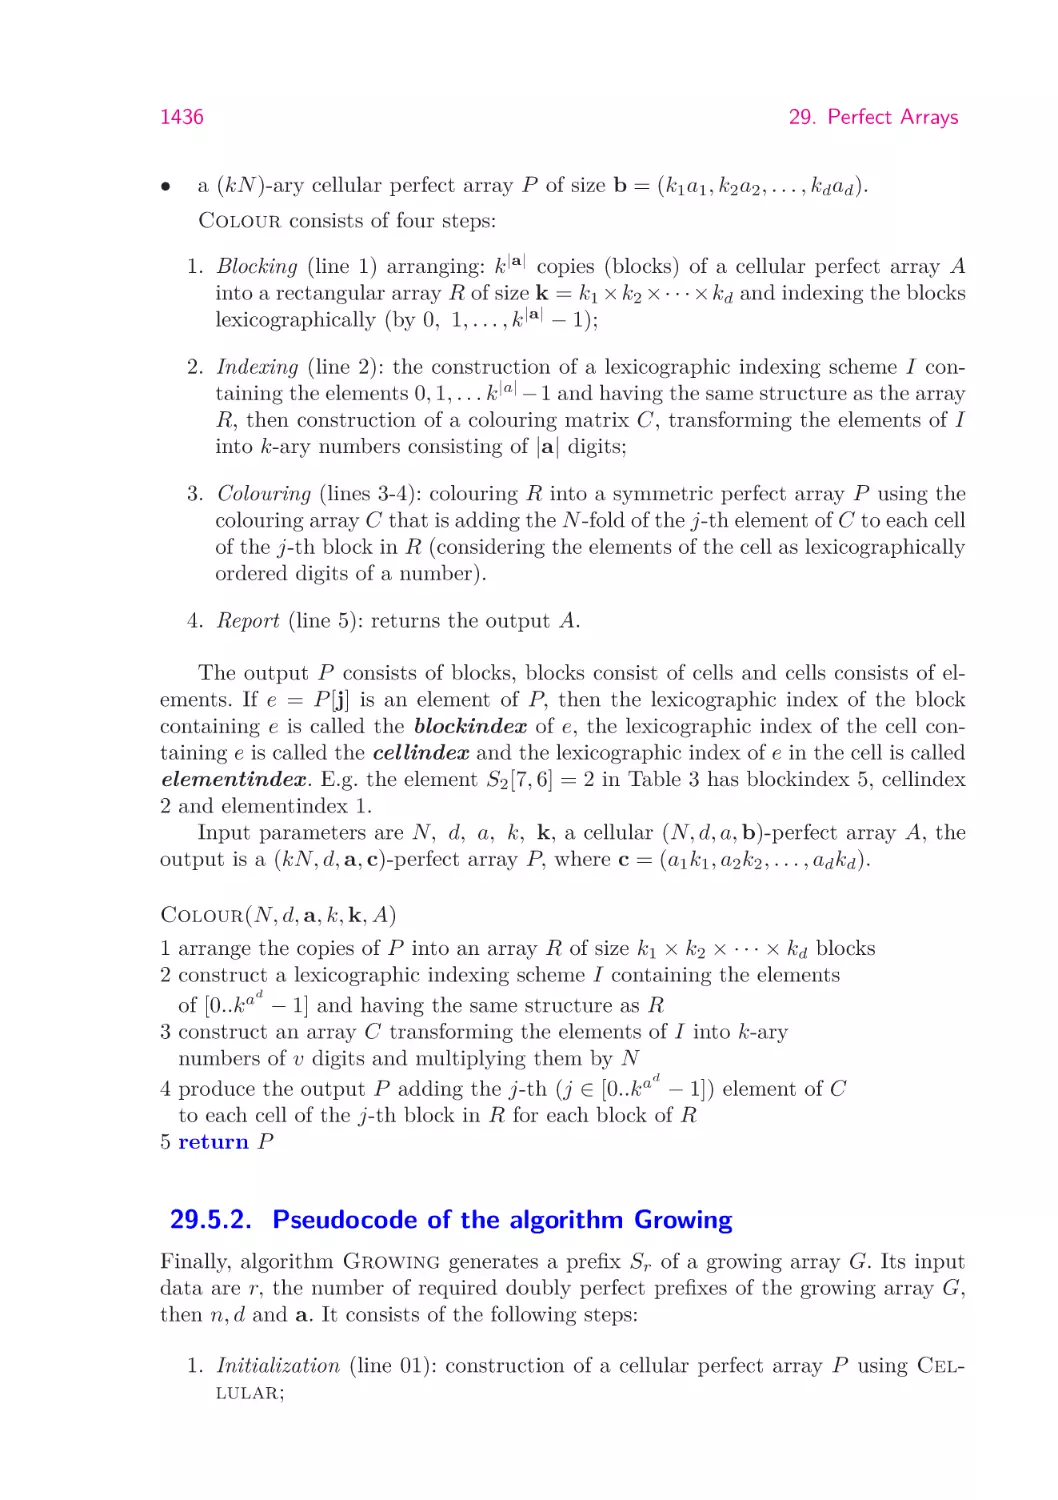 29.5.2.  Pseudocode of the algorithm Growing